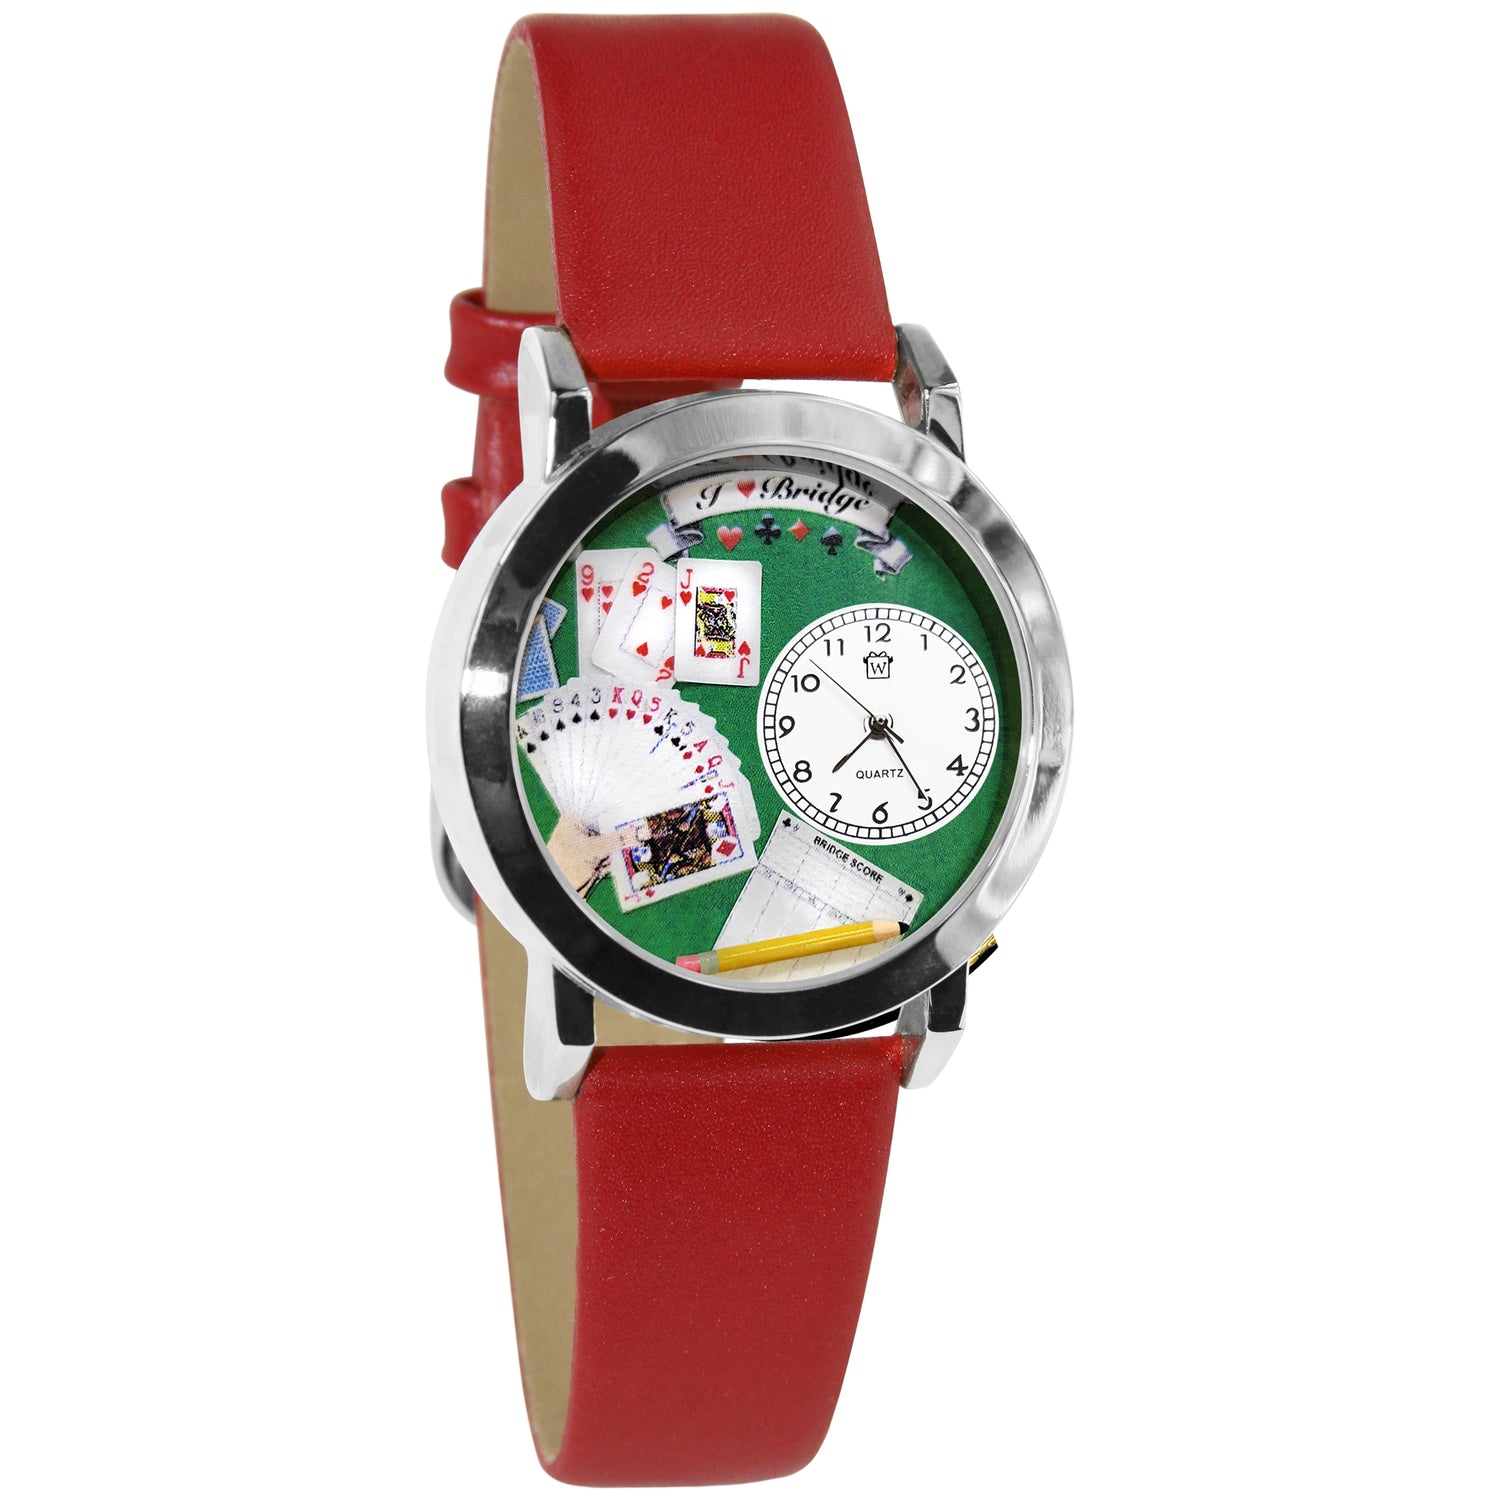 Whimsical Gifts | Bridge 3D Watch Small Style | Handmade in USA | Hobbies & Special Interests | Casino | Gaming | Game Night | Novelty Unique Fun Miniatures Gift | Silver Finish Red Leather Watch Band